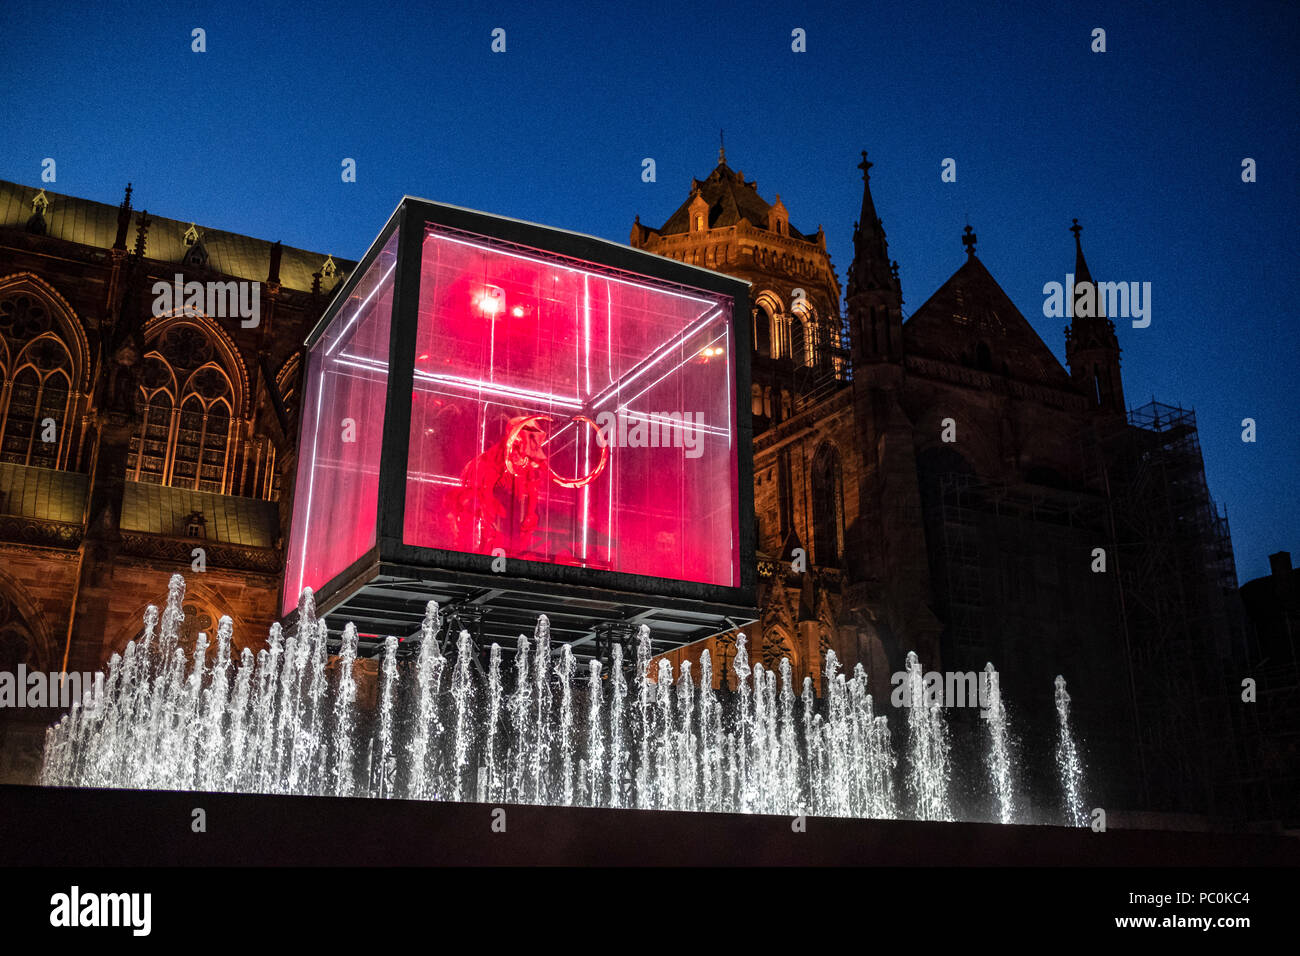 Strasbourg, 12.000-year-old mammoth skeleton suspended in display case, jet water fountain, illuminated cathedral, night, Alsace, France, Europe, Stock Photo